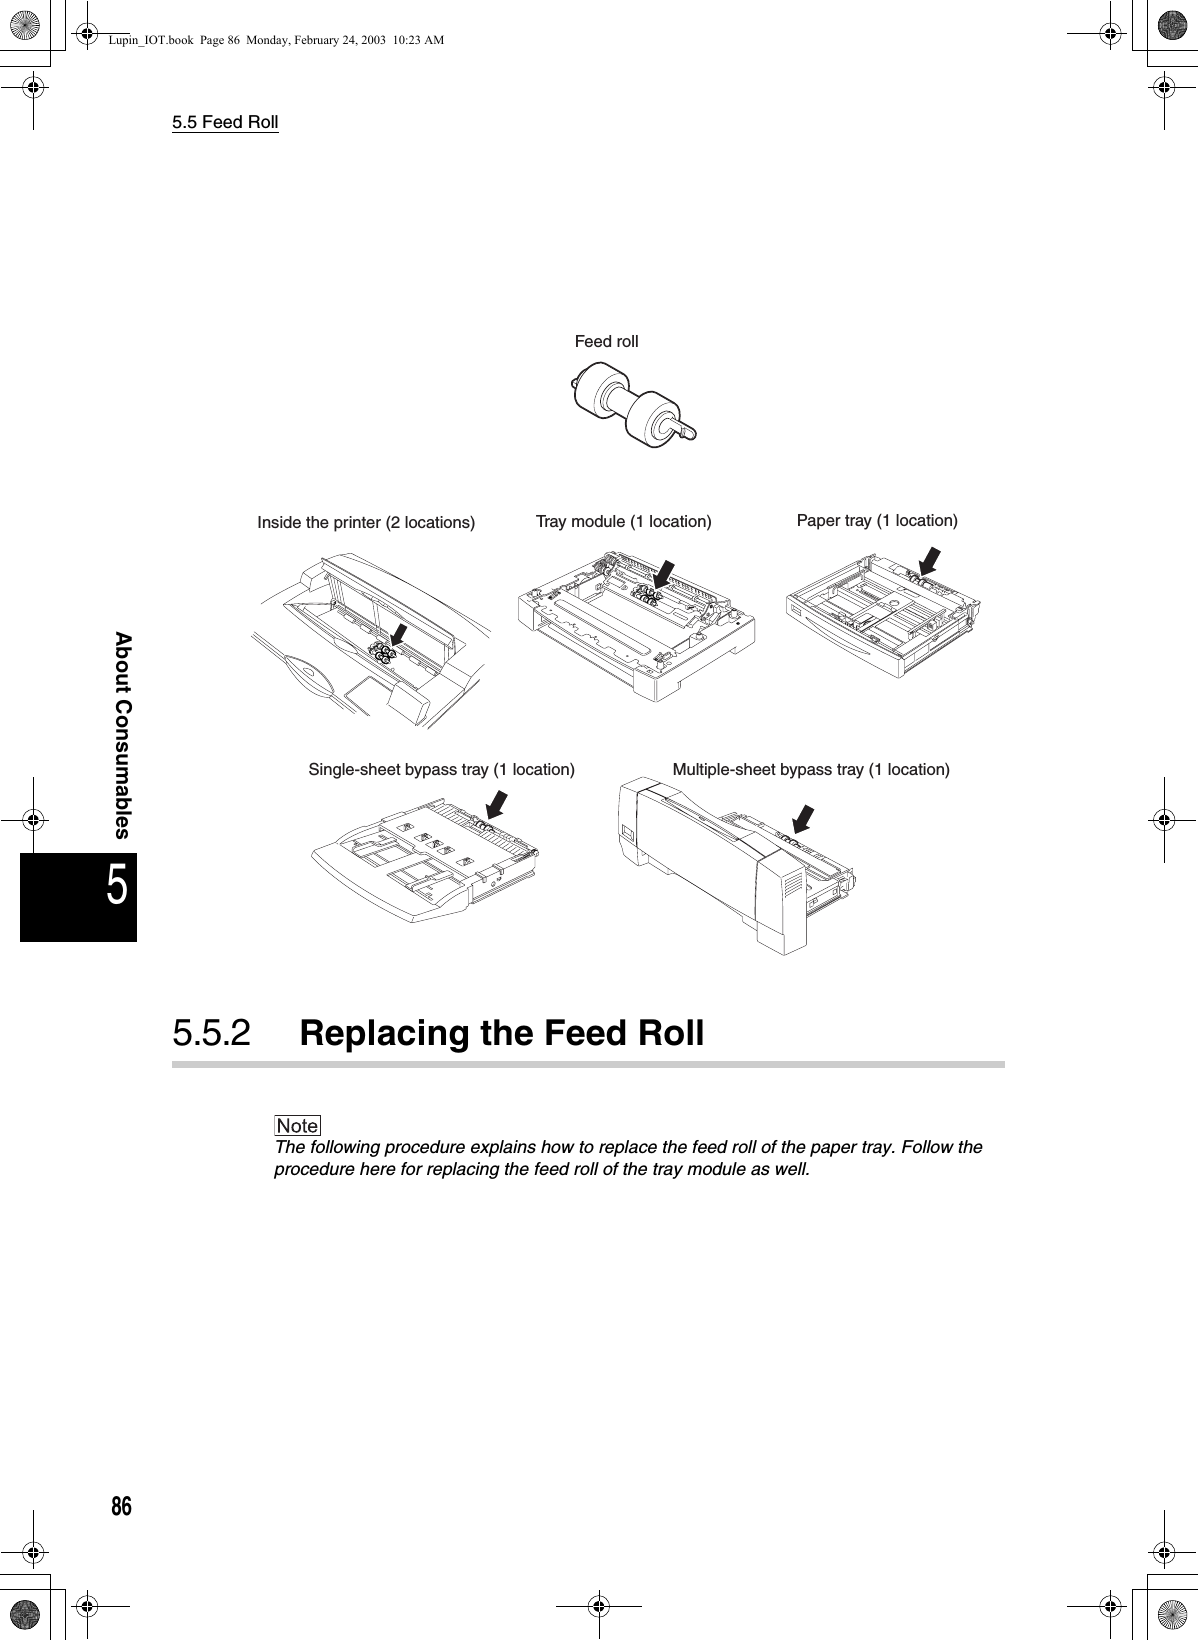 5.5 Feed Roll865About Consumables5.5.2 Replacing the Feed RollThe following procedure explains how to replace the feed roll of the paper tray. Follow the procedure here for replacing the feed roll of the tray module as well. Inside the printer (2 locations)Single-sheet bypass tray (1 location) Multiple-sheet bypass tray (1 location)Feed rollTray module (1 location) Paper tray (1 location)Lupin_IOT.book  Page 86  Monday, February 24, 2003  10:23 AM